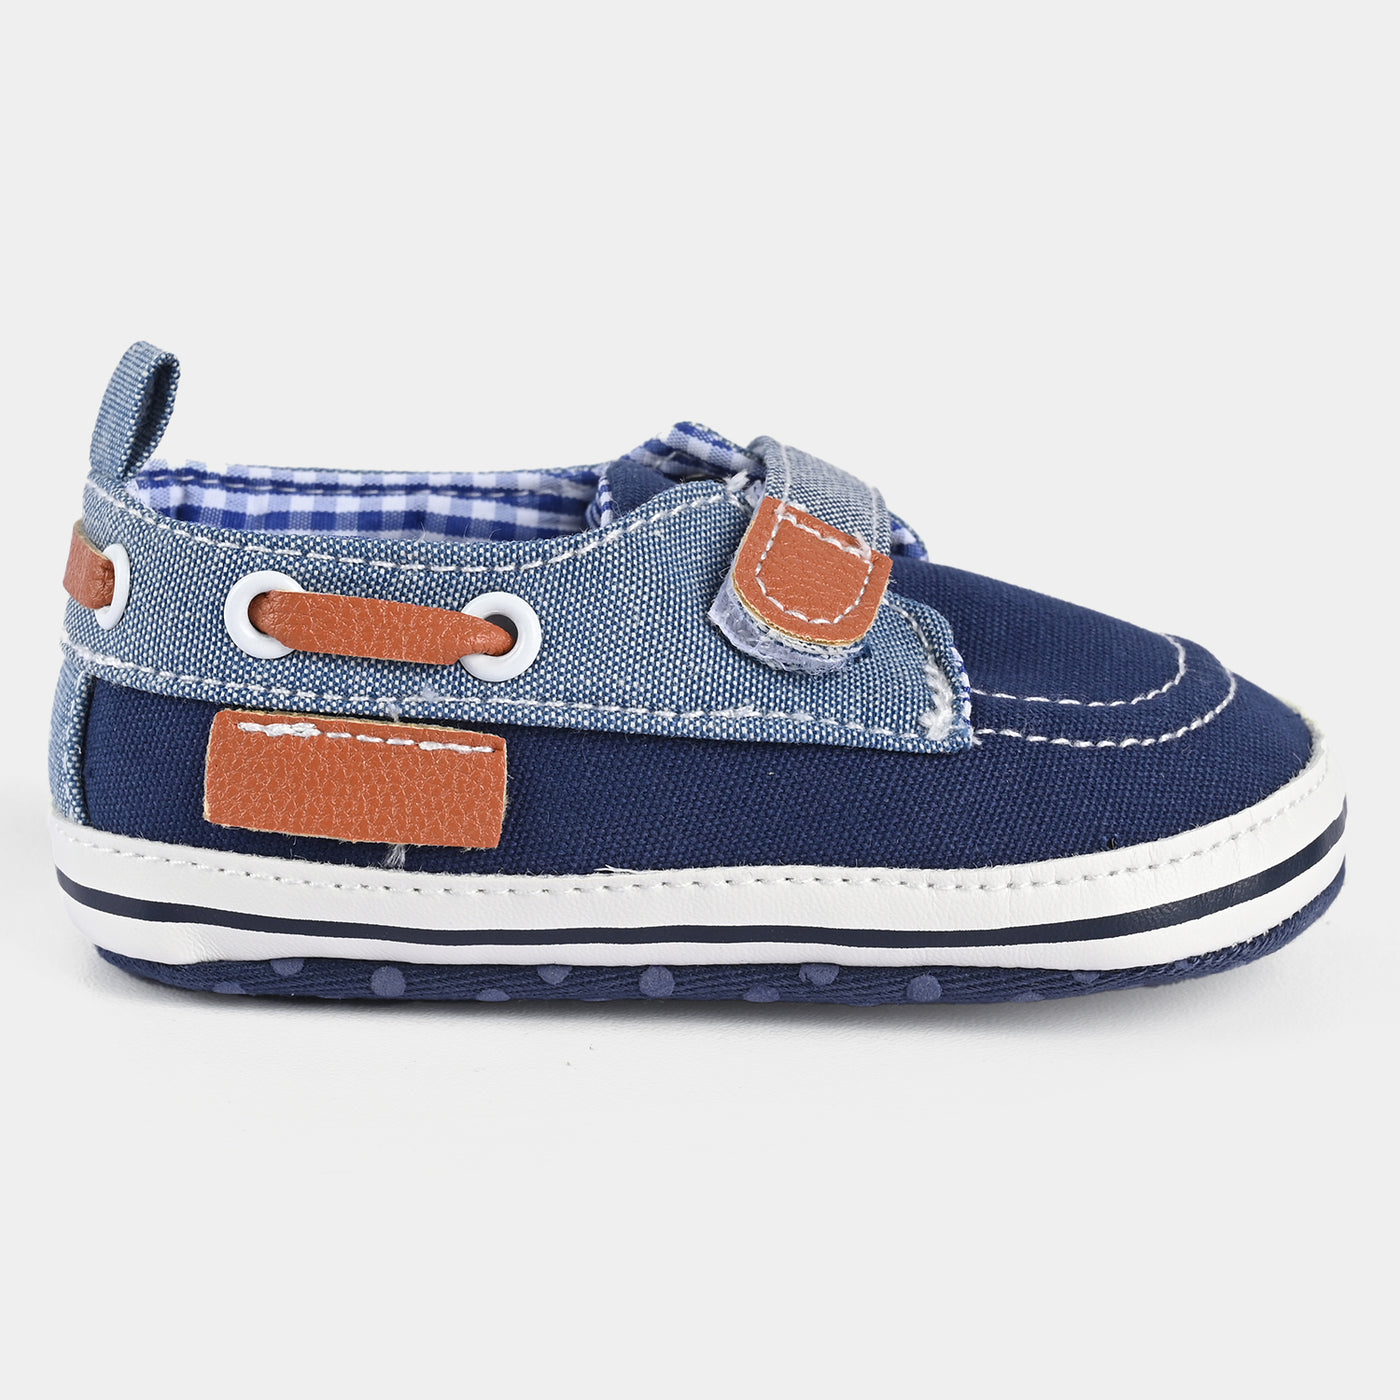 Baby Boys Shoes D90-NAVY